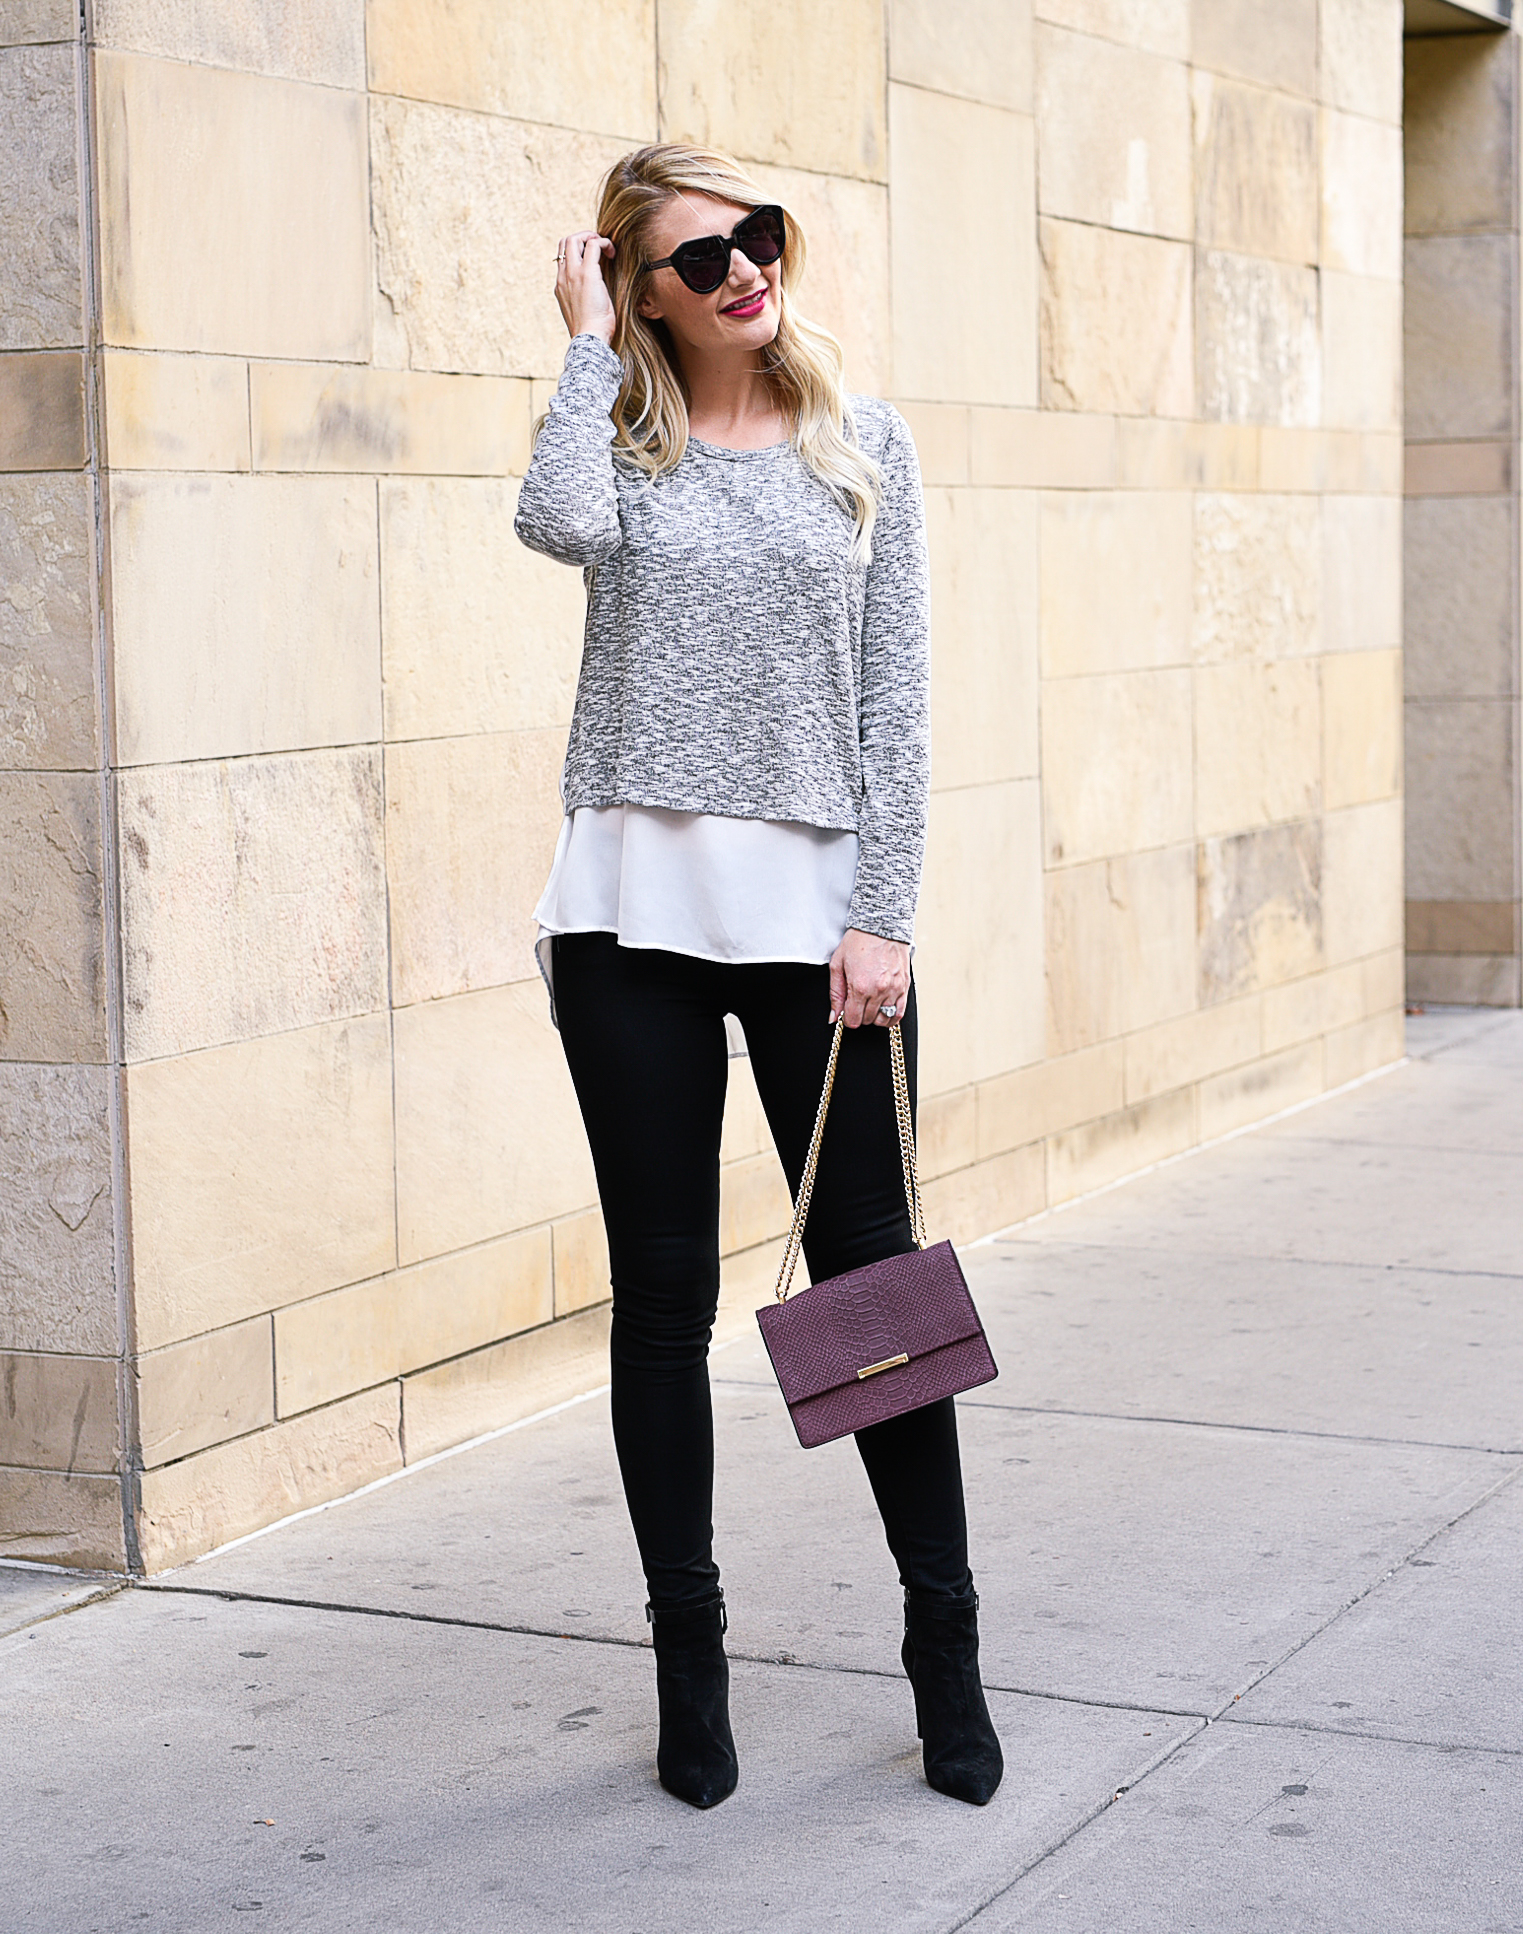 Jenna Colgrove wearing a Gibson Mixed Media layered blouse, black skinny jeans, and the Ivanka Trump Mara cocktail back in burgundy. 